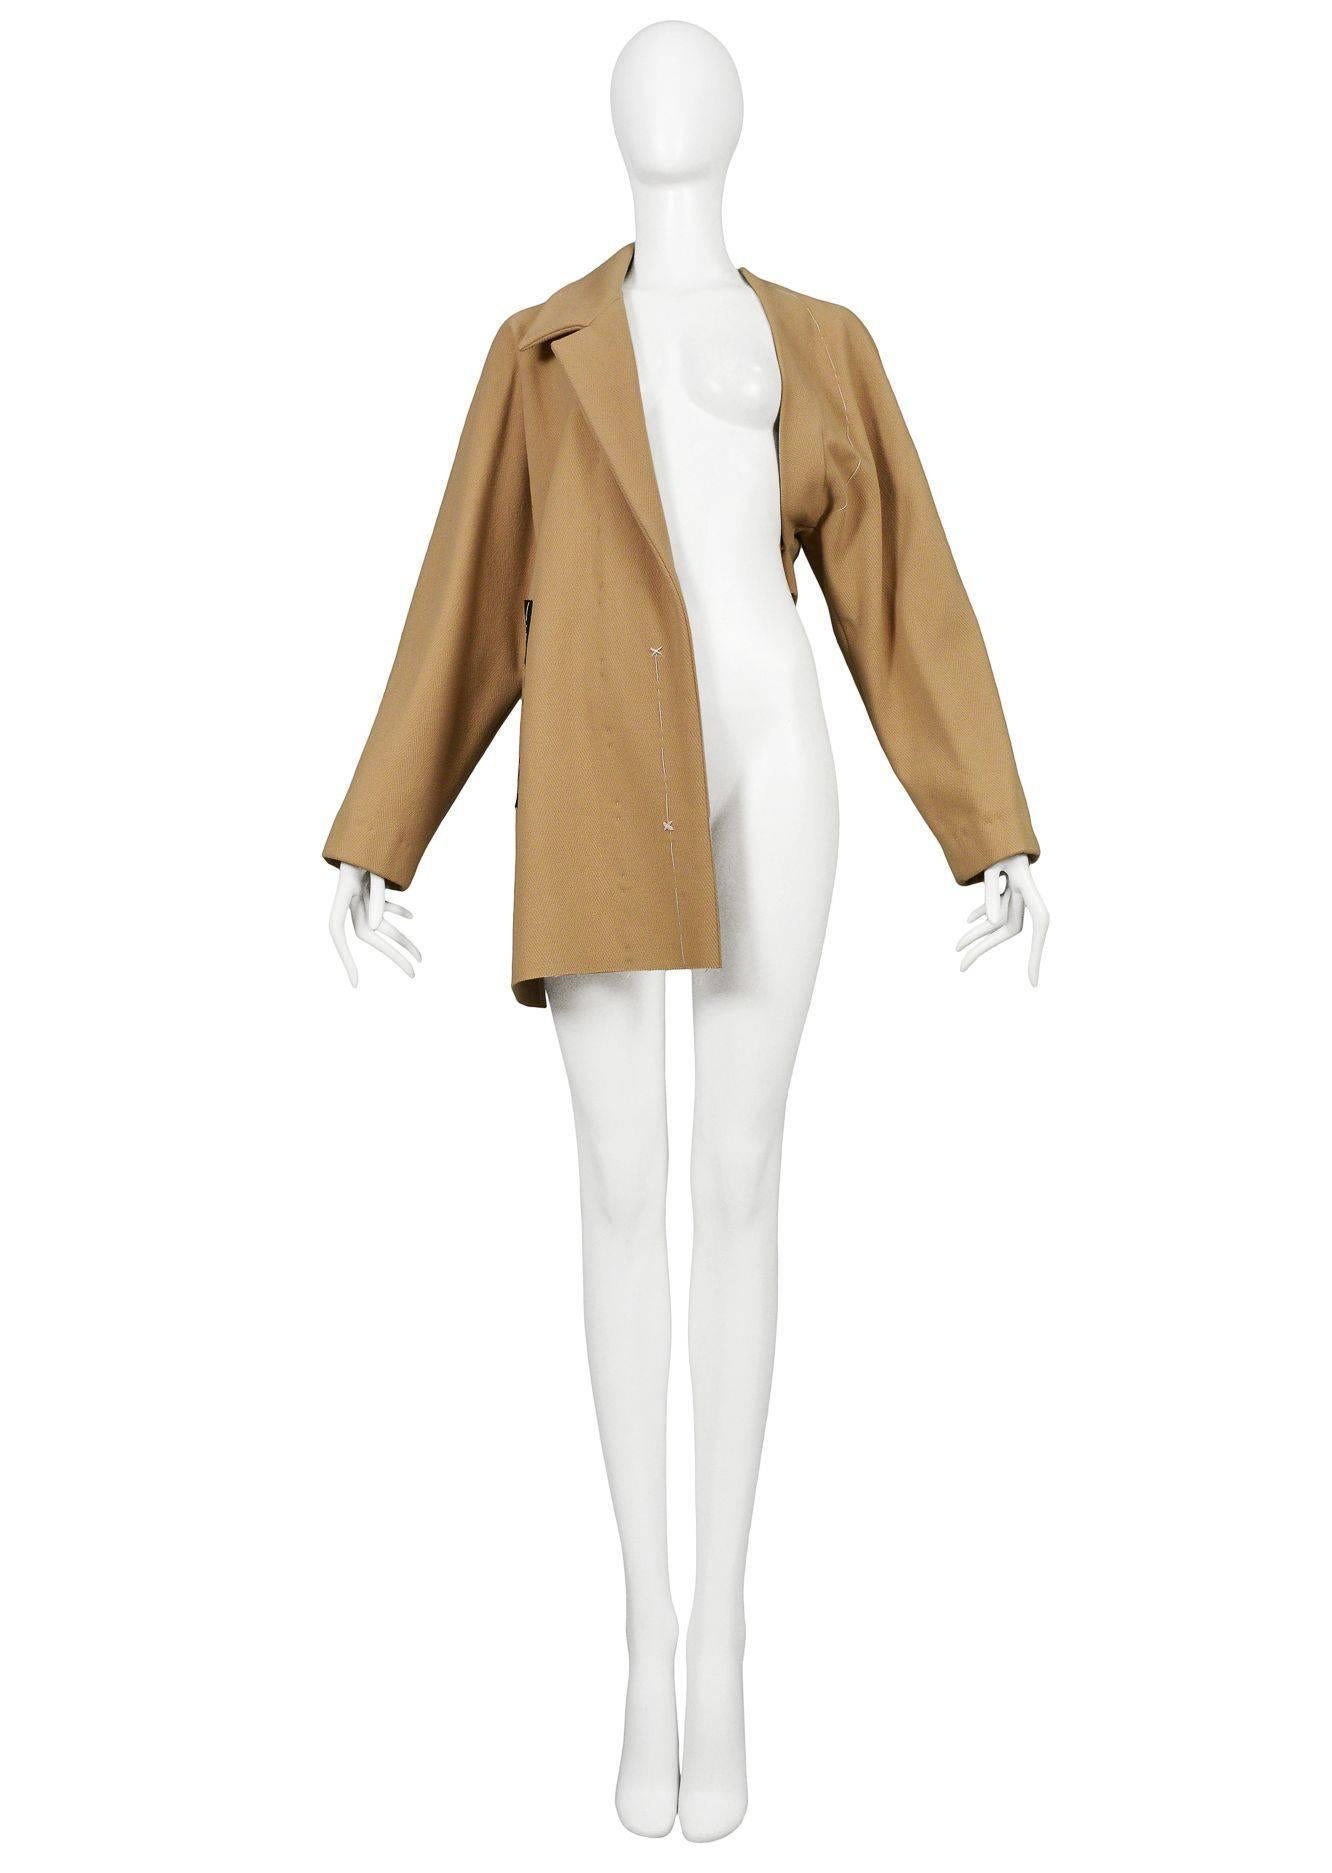 Vintage Maison Martin Margiela Basting Coat. Tan suiting lapel coat with white basting stitching throughout. Runway piece from the Autumn / Winter 1997 Collection.